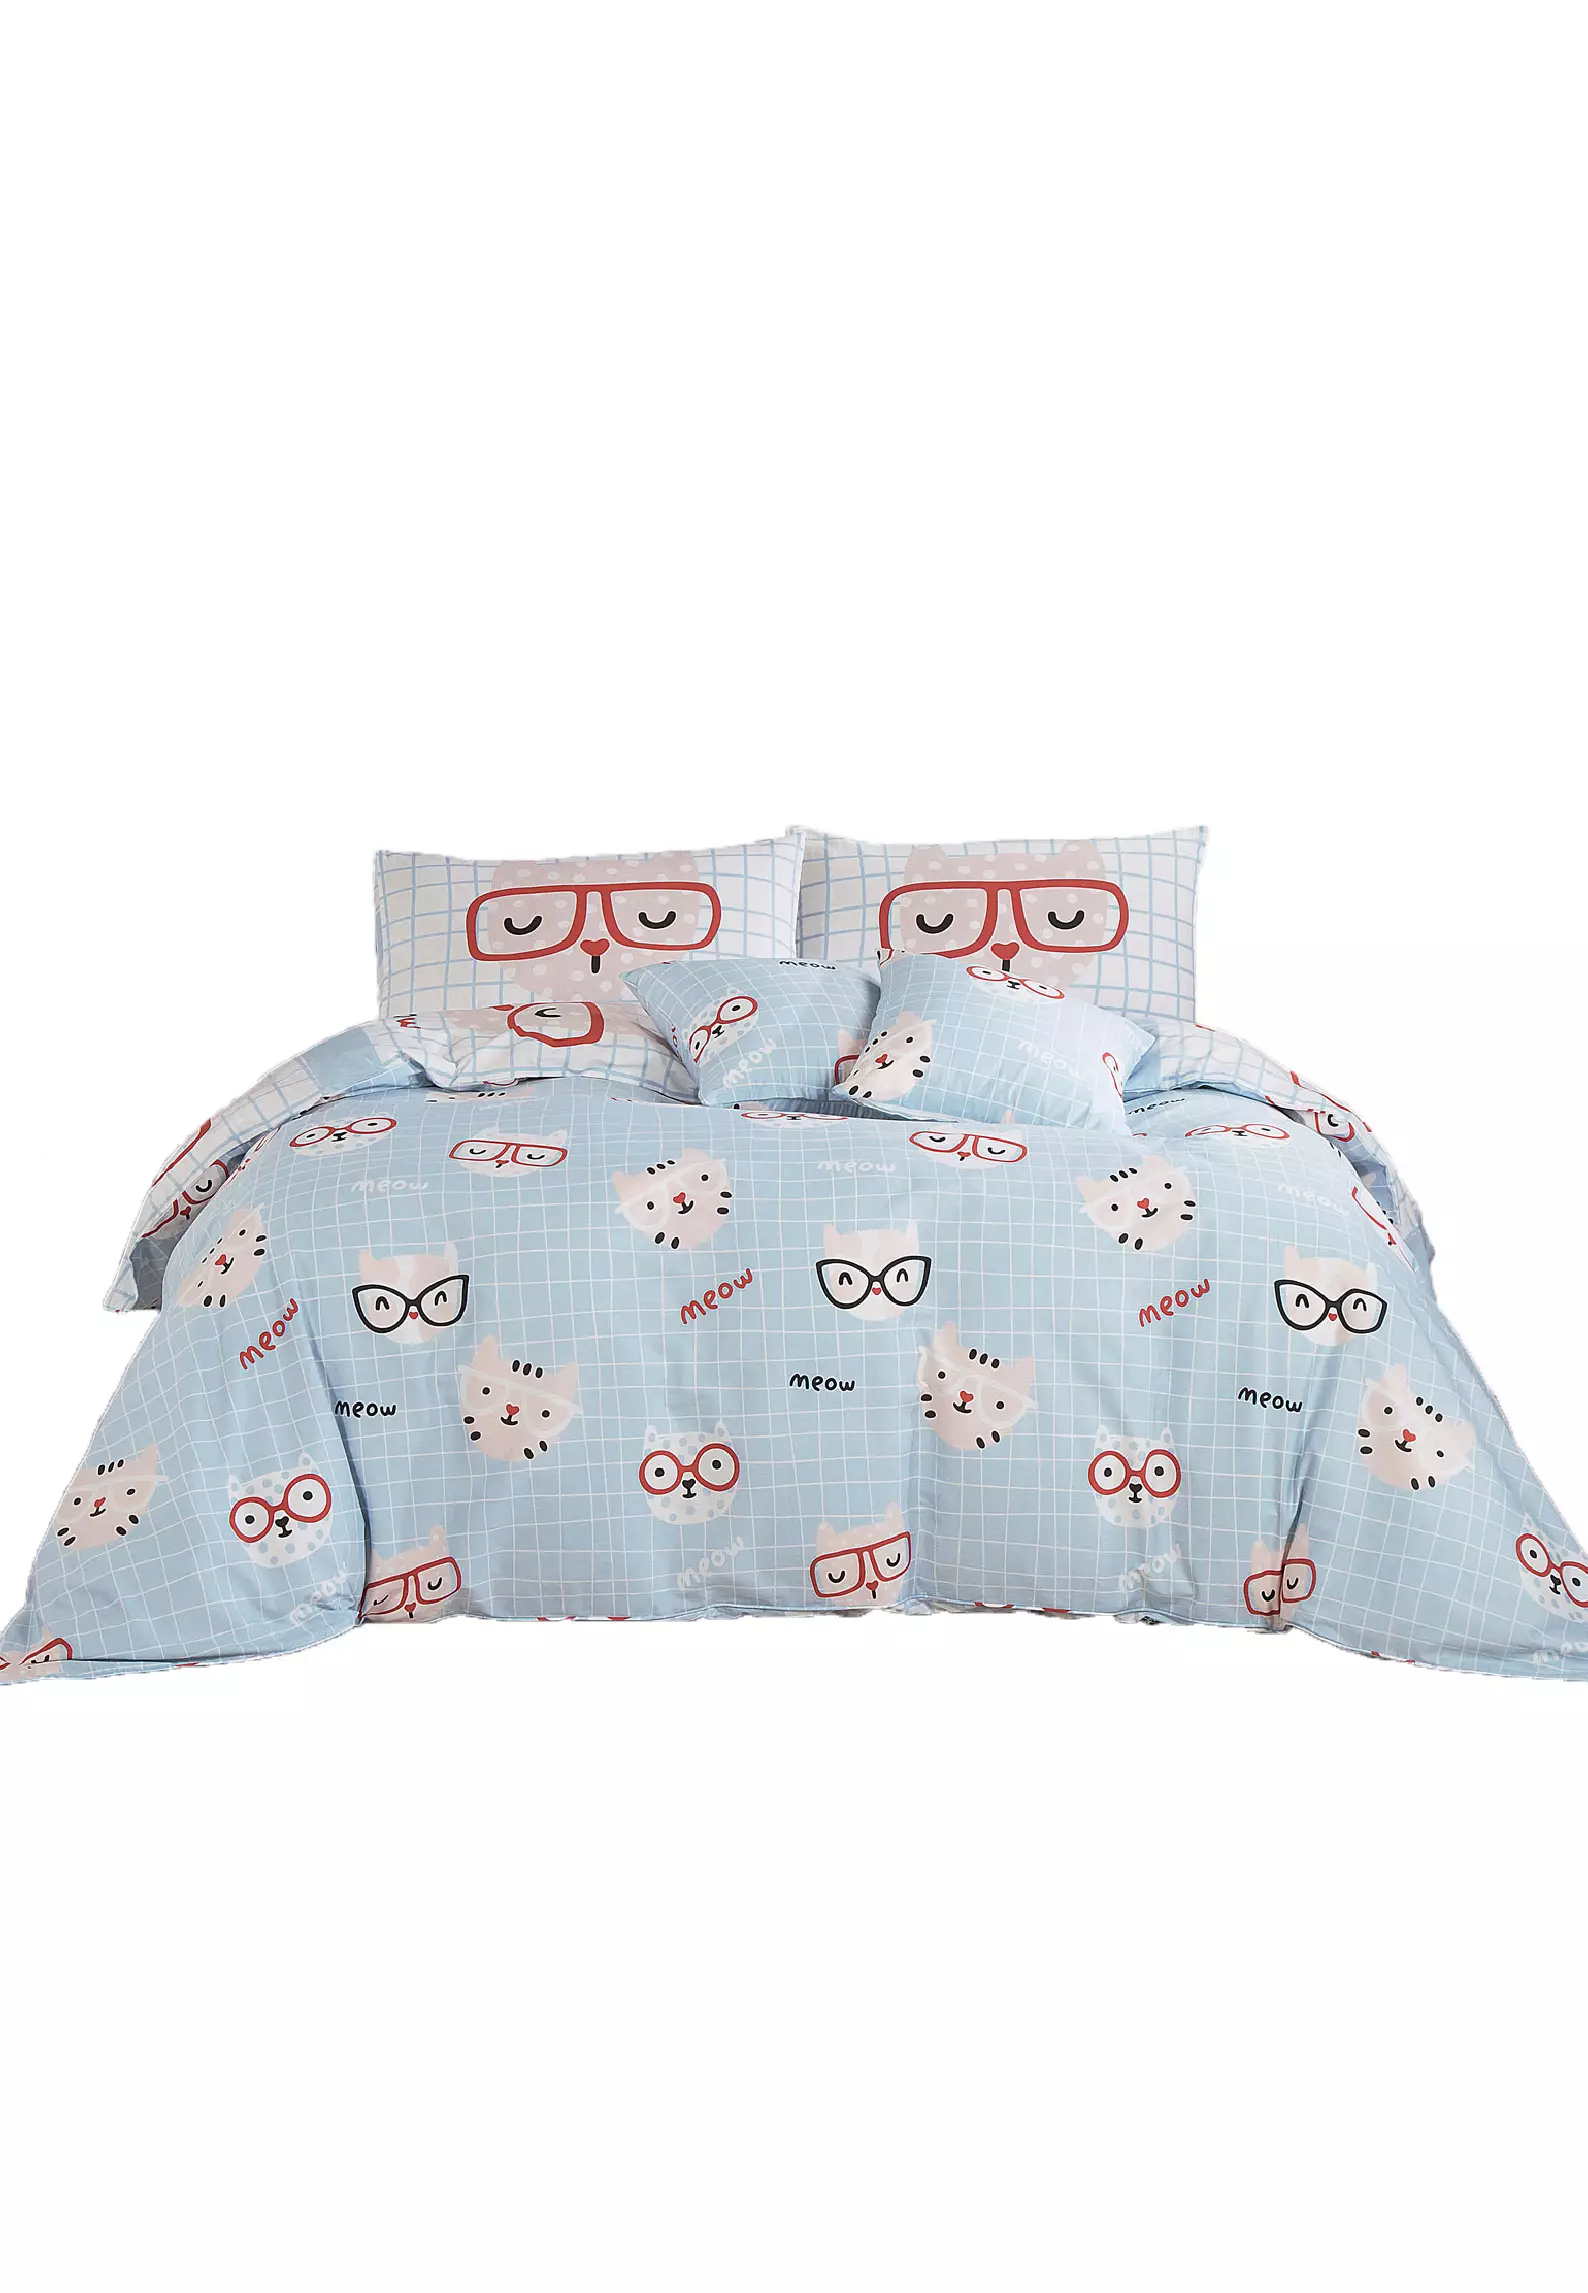 AKEMI Cotton Select Cheeky Cheeks 730TC Quilt Cover Set - Meow Friends  (Super Single/Queen/King)